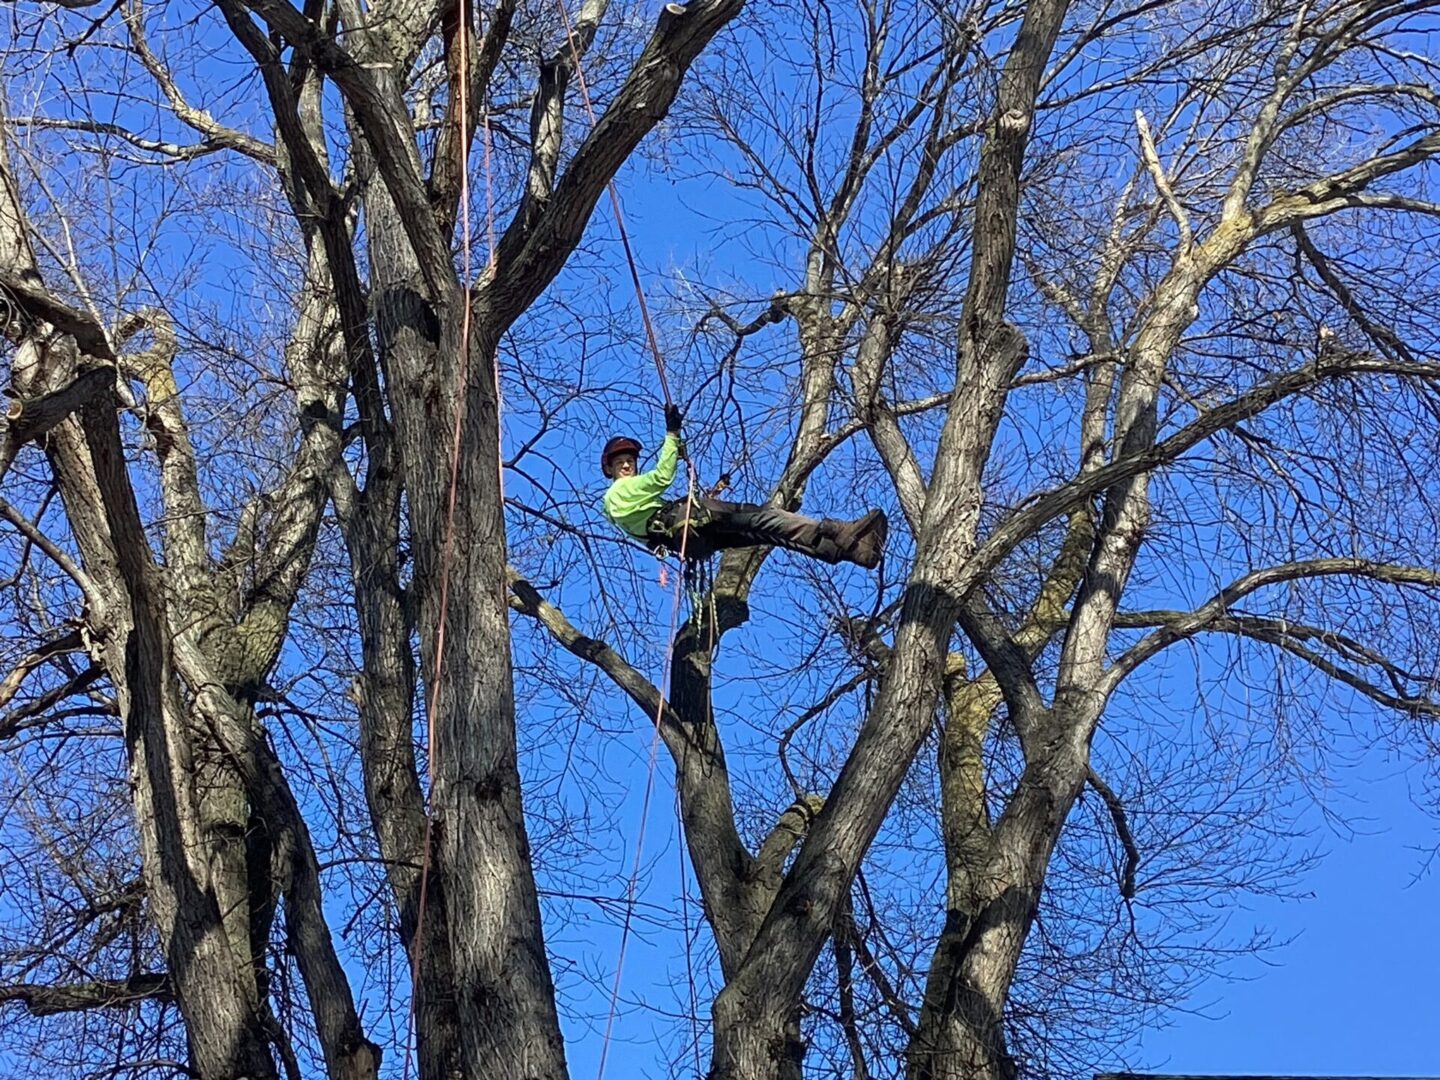 A man going down the tree with a rope